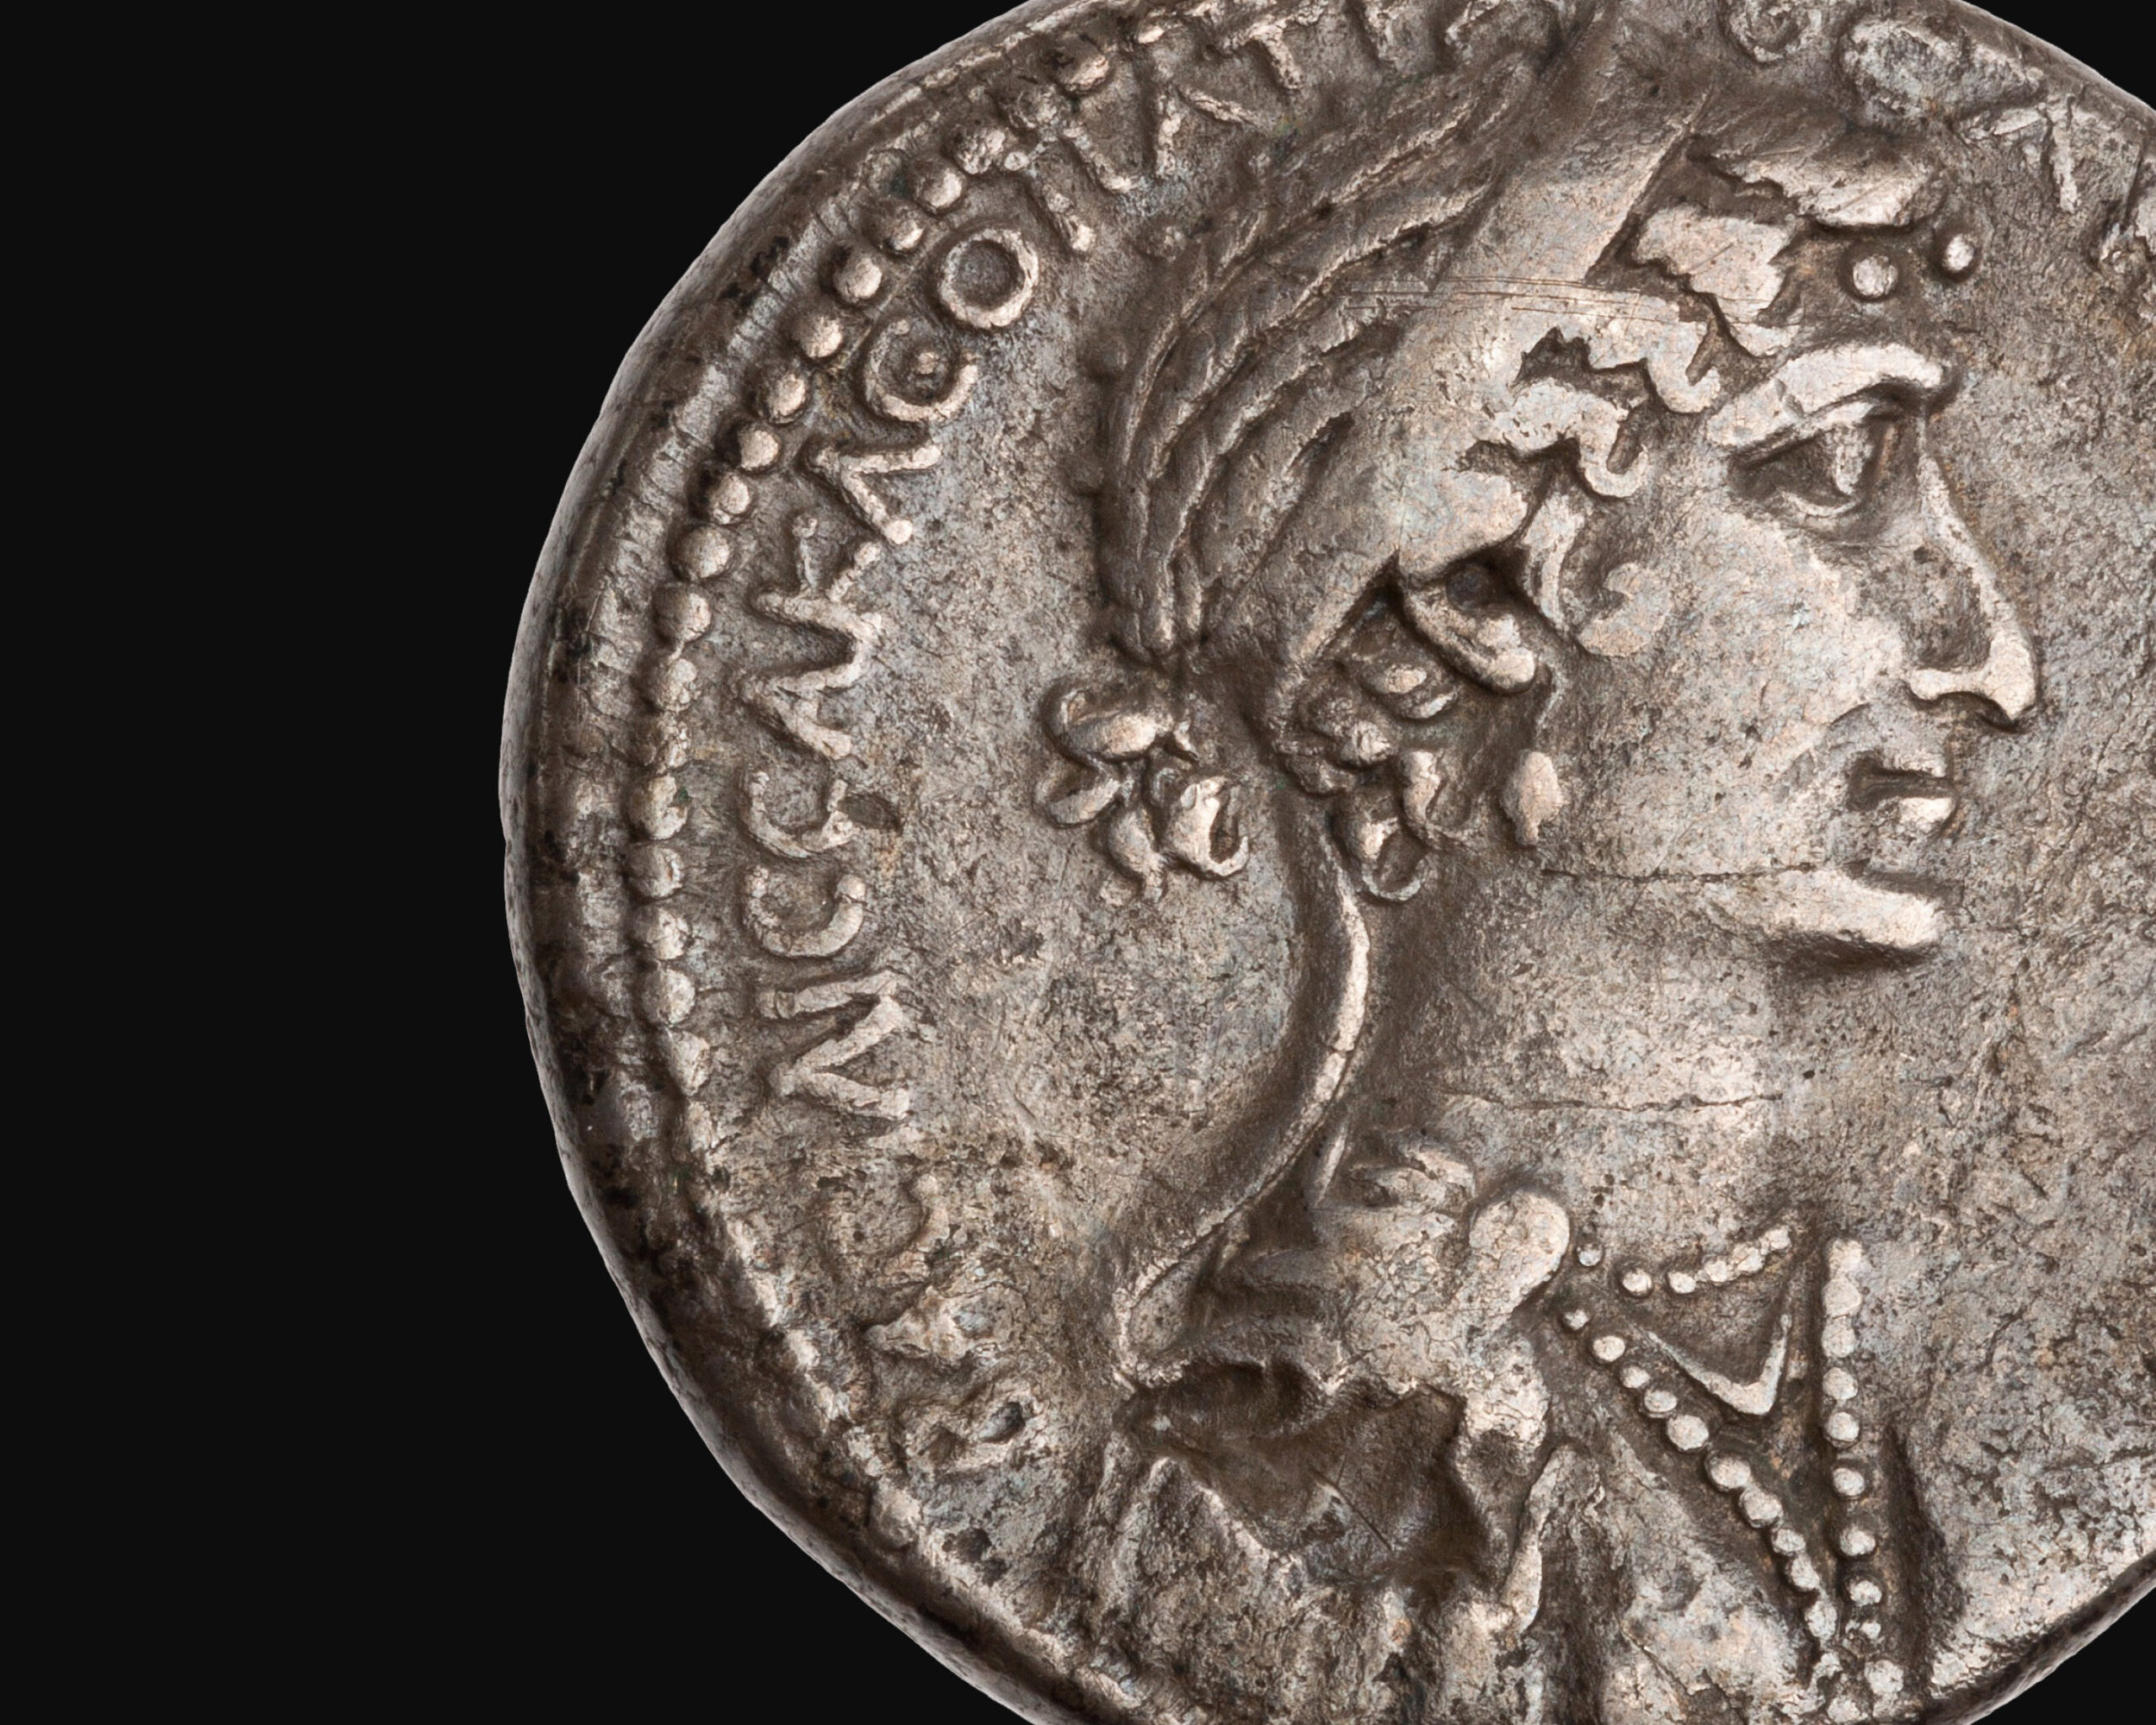 Long Table 104. Portraits of Women on Roman Coinage in the Late Republic and Early Roman Empire Part II